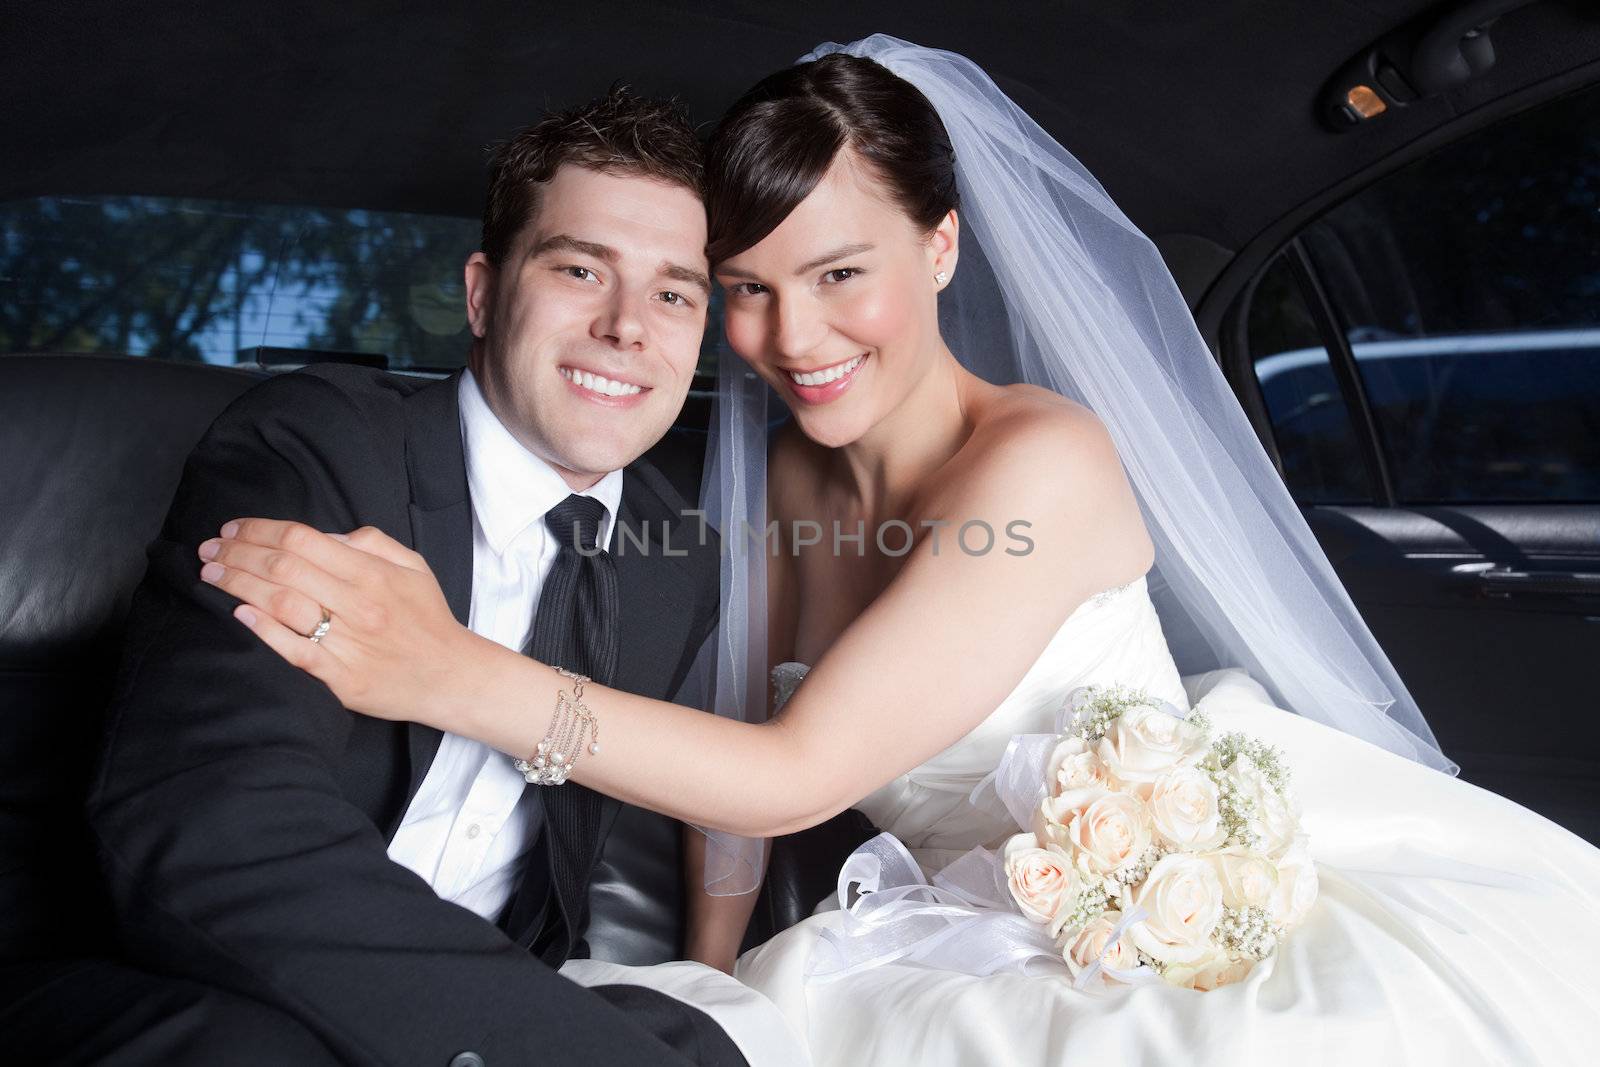 Portrait Of Newlywed Couple Smiling Sitting In Limousine.